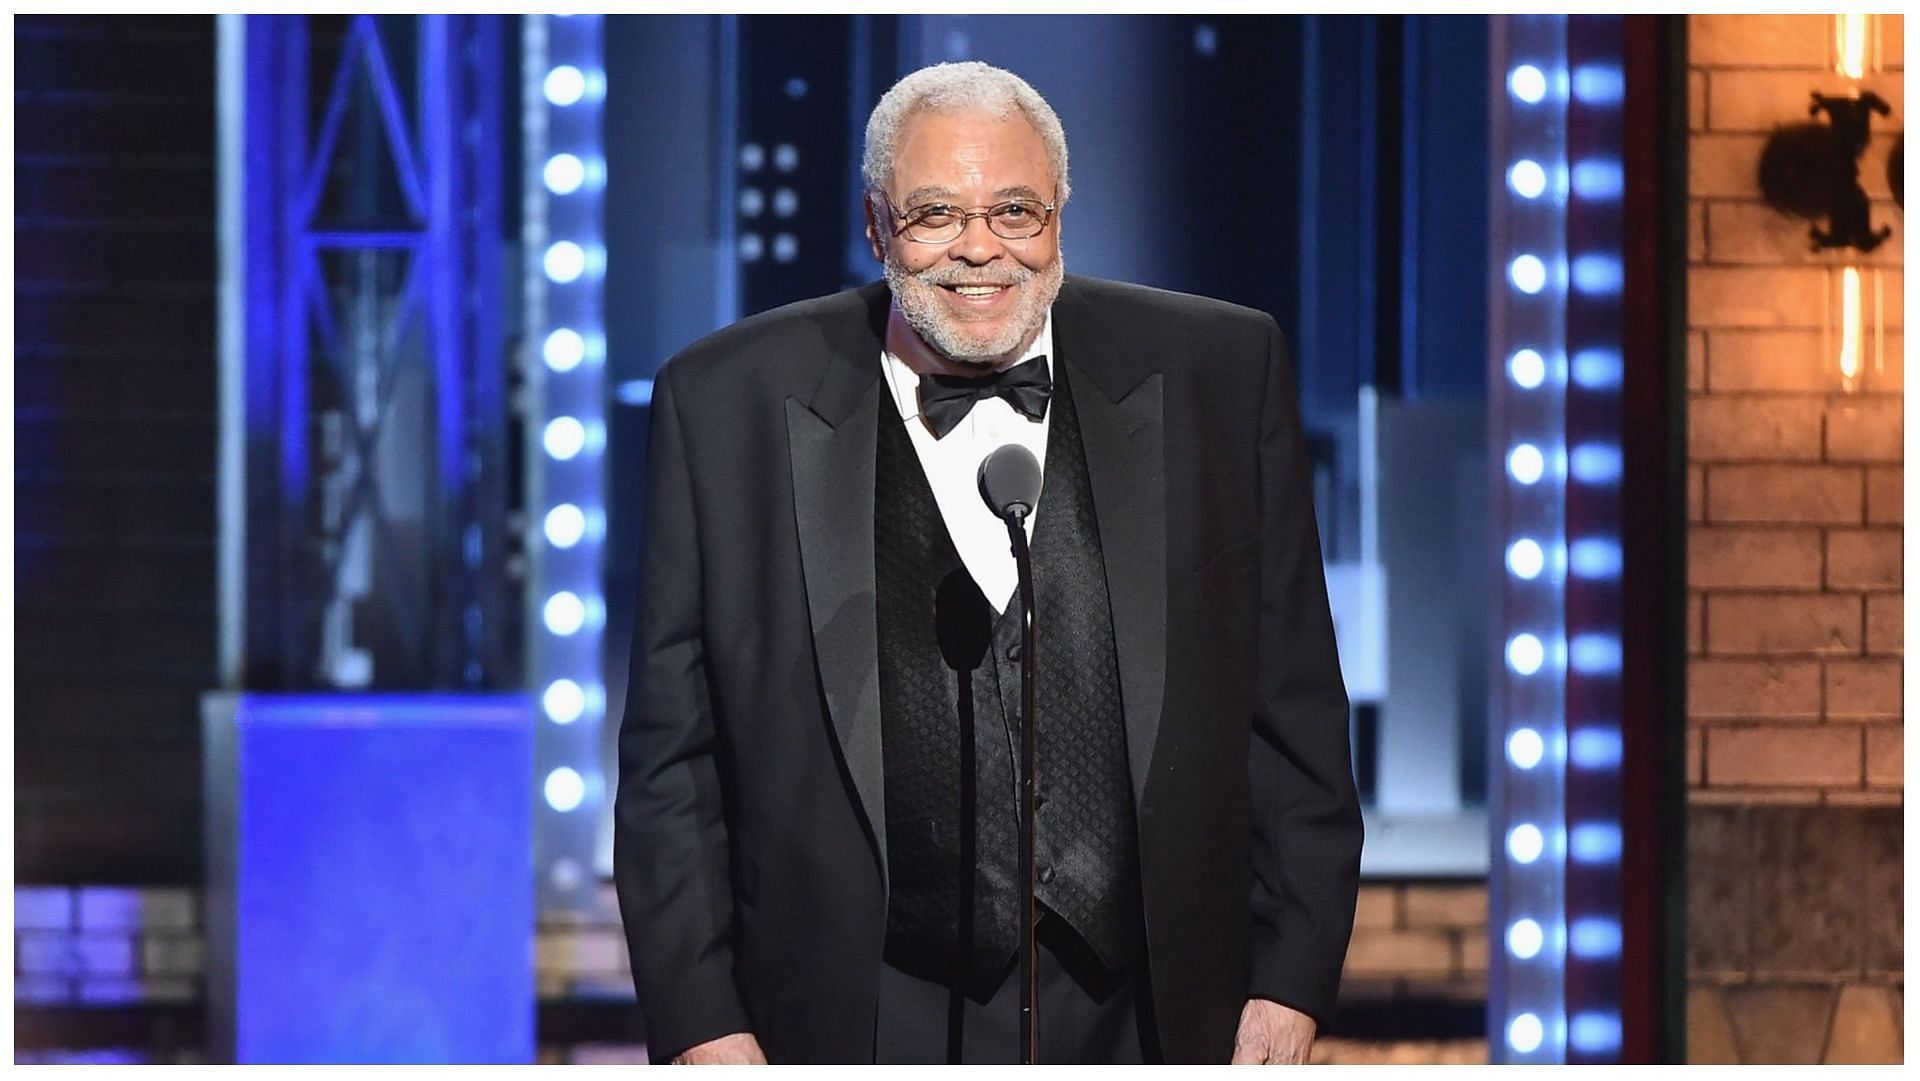 James Earl Jones has stepped down as Darth Vader from Star Wars (Image via Theo Wargo/Getty Images)